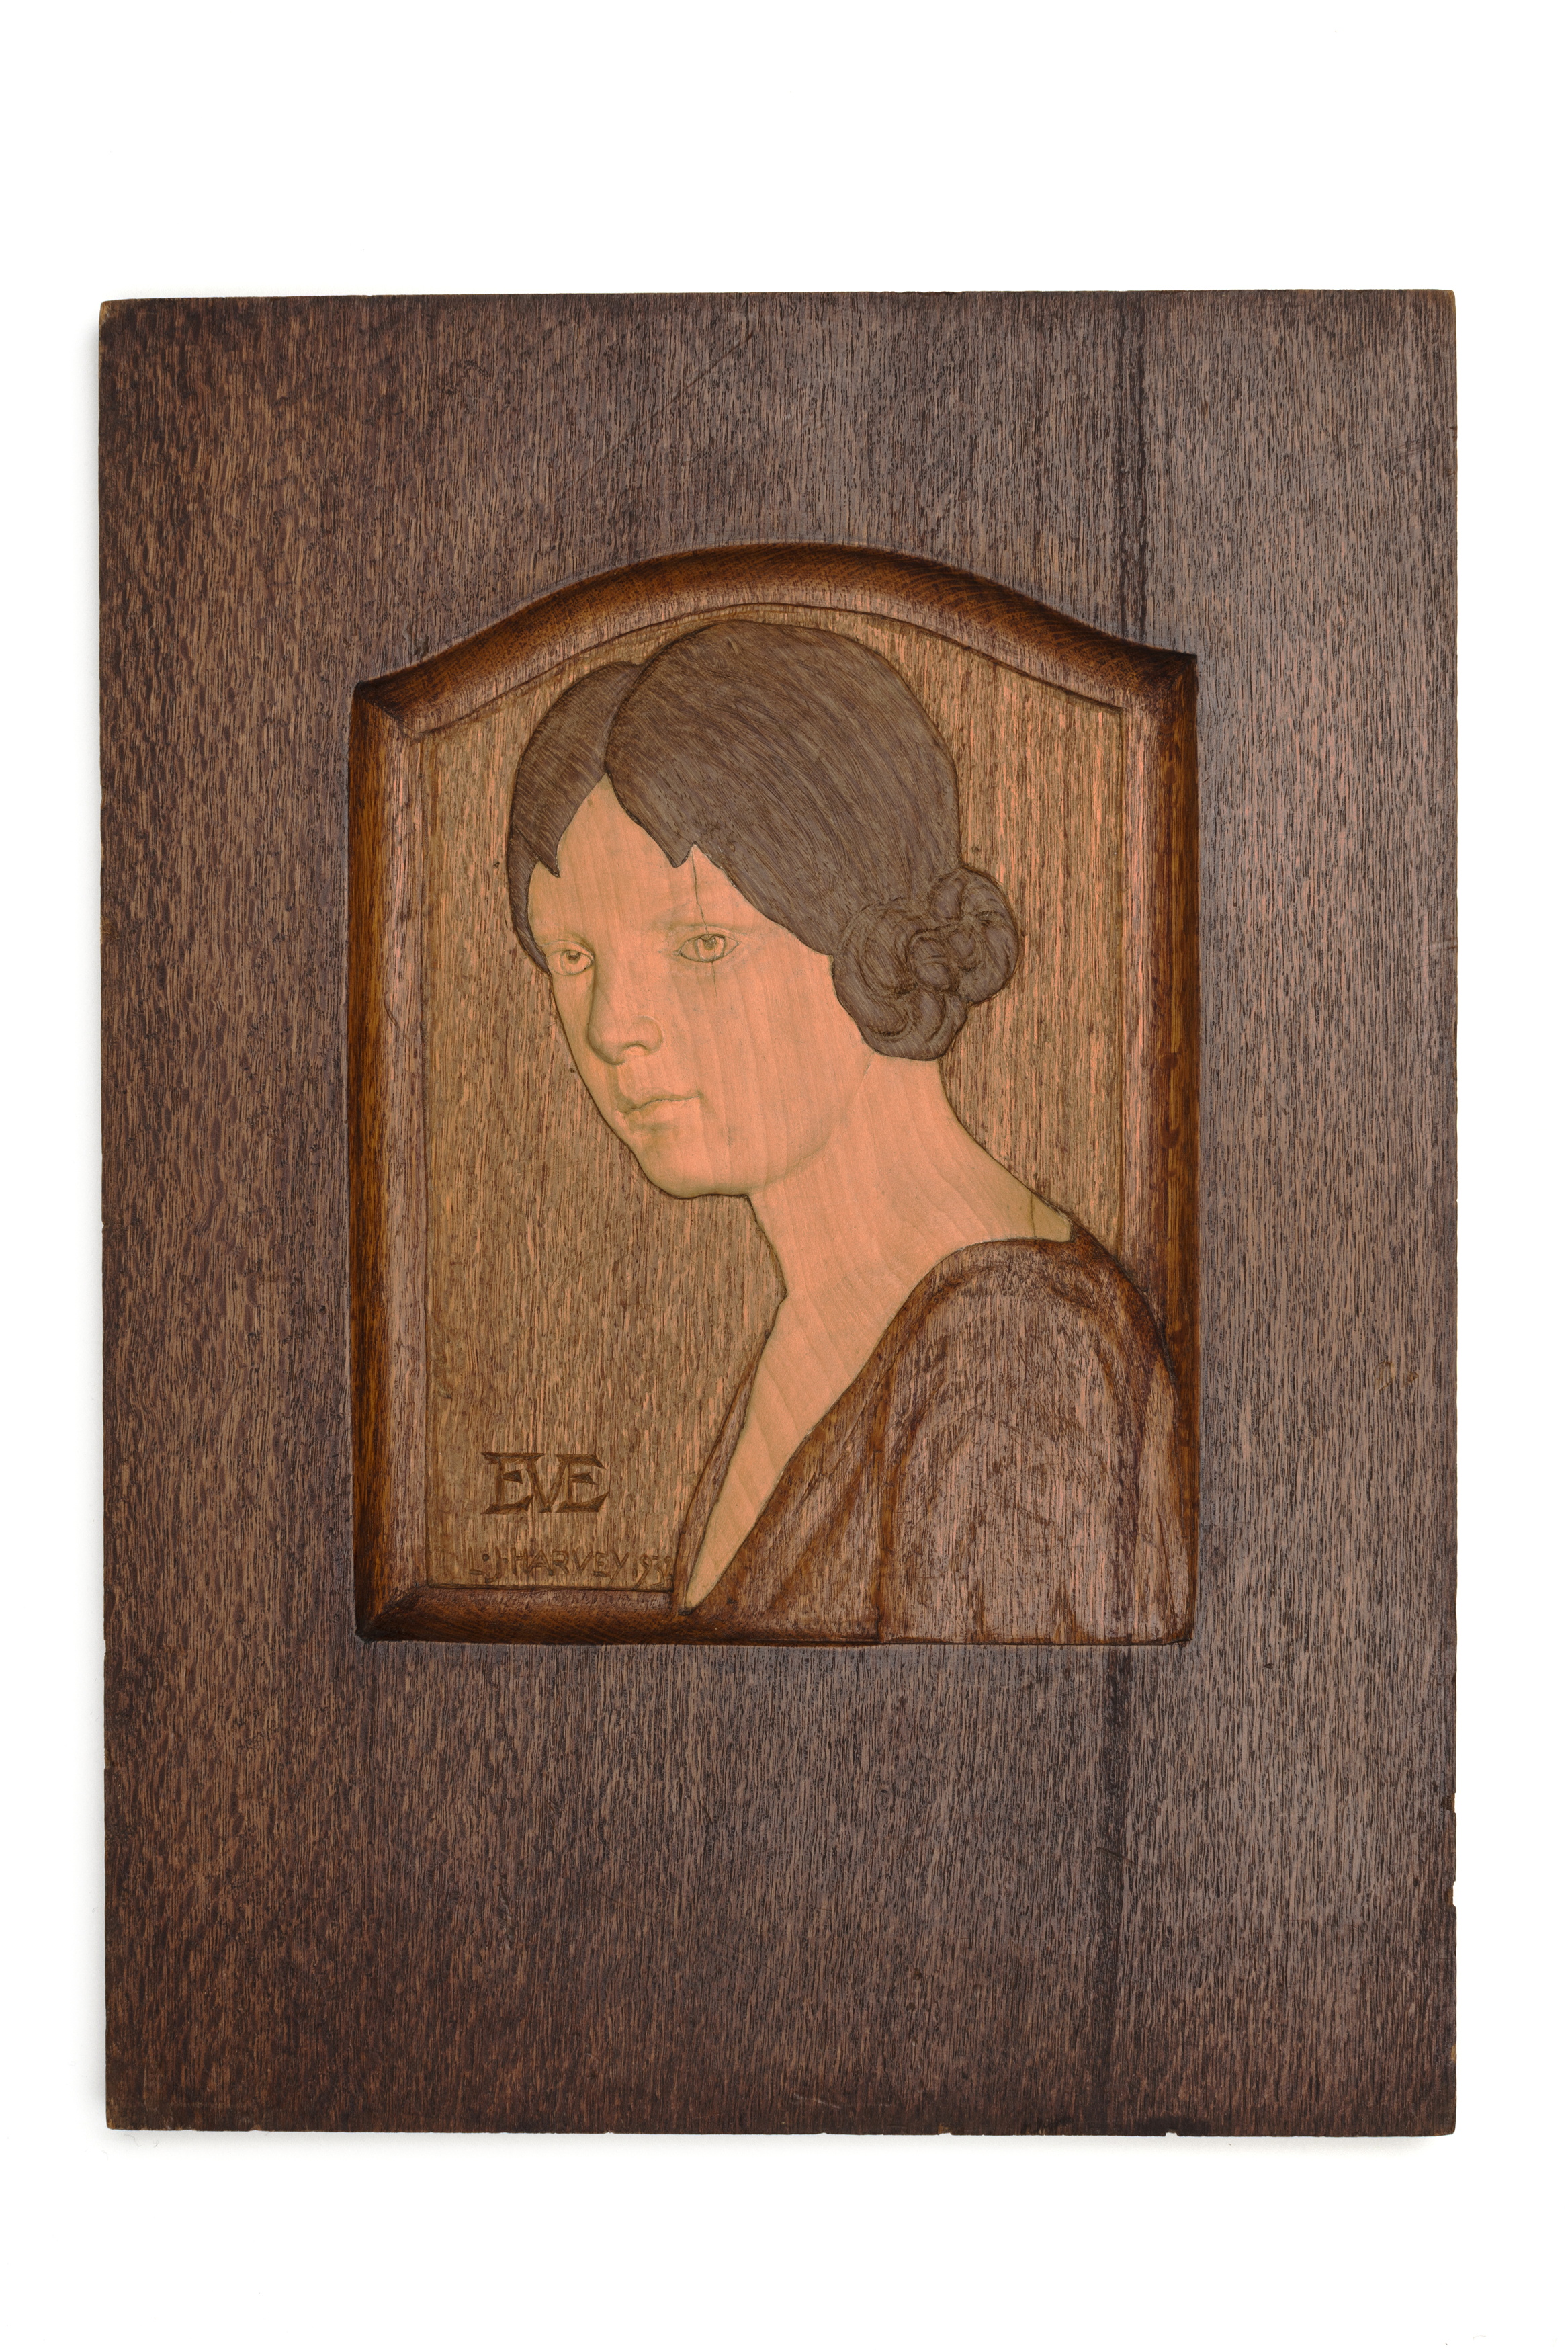 'Eve' carved timber panel by Lewis Jarvis Harvey